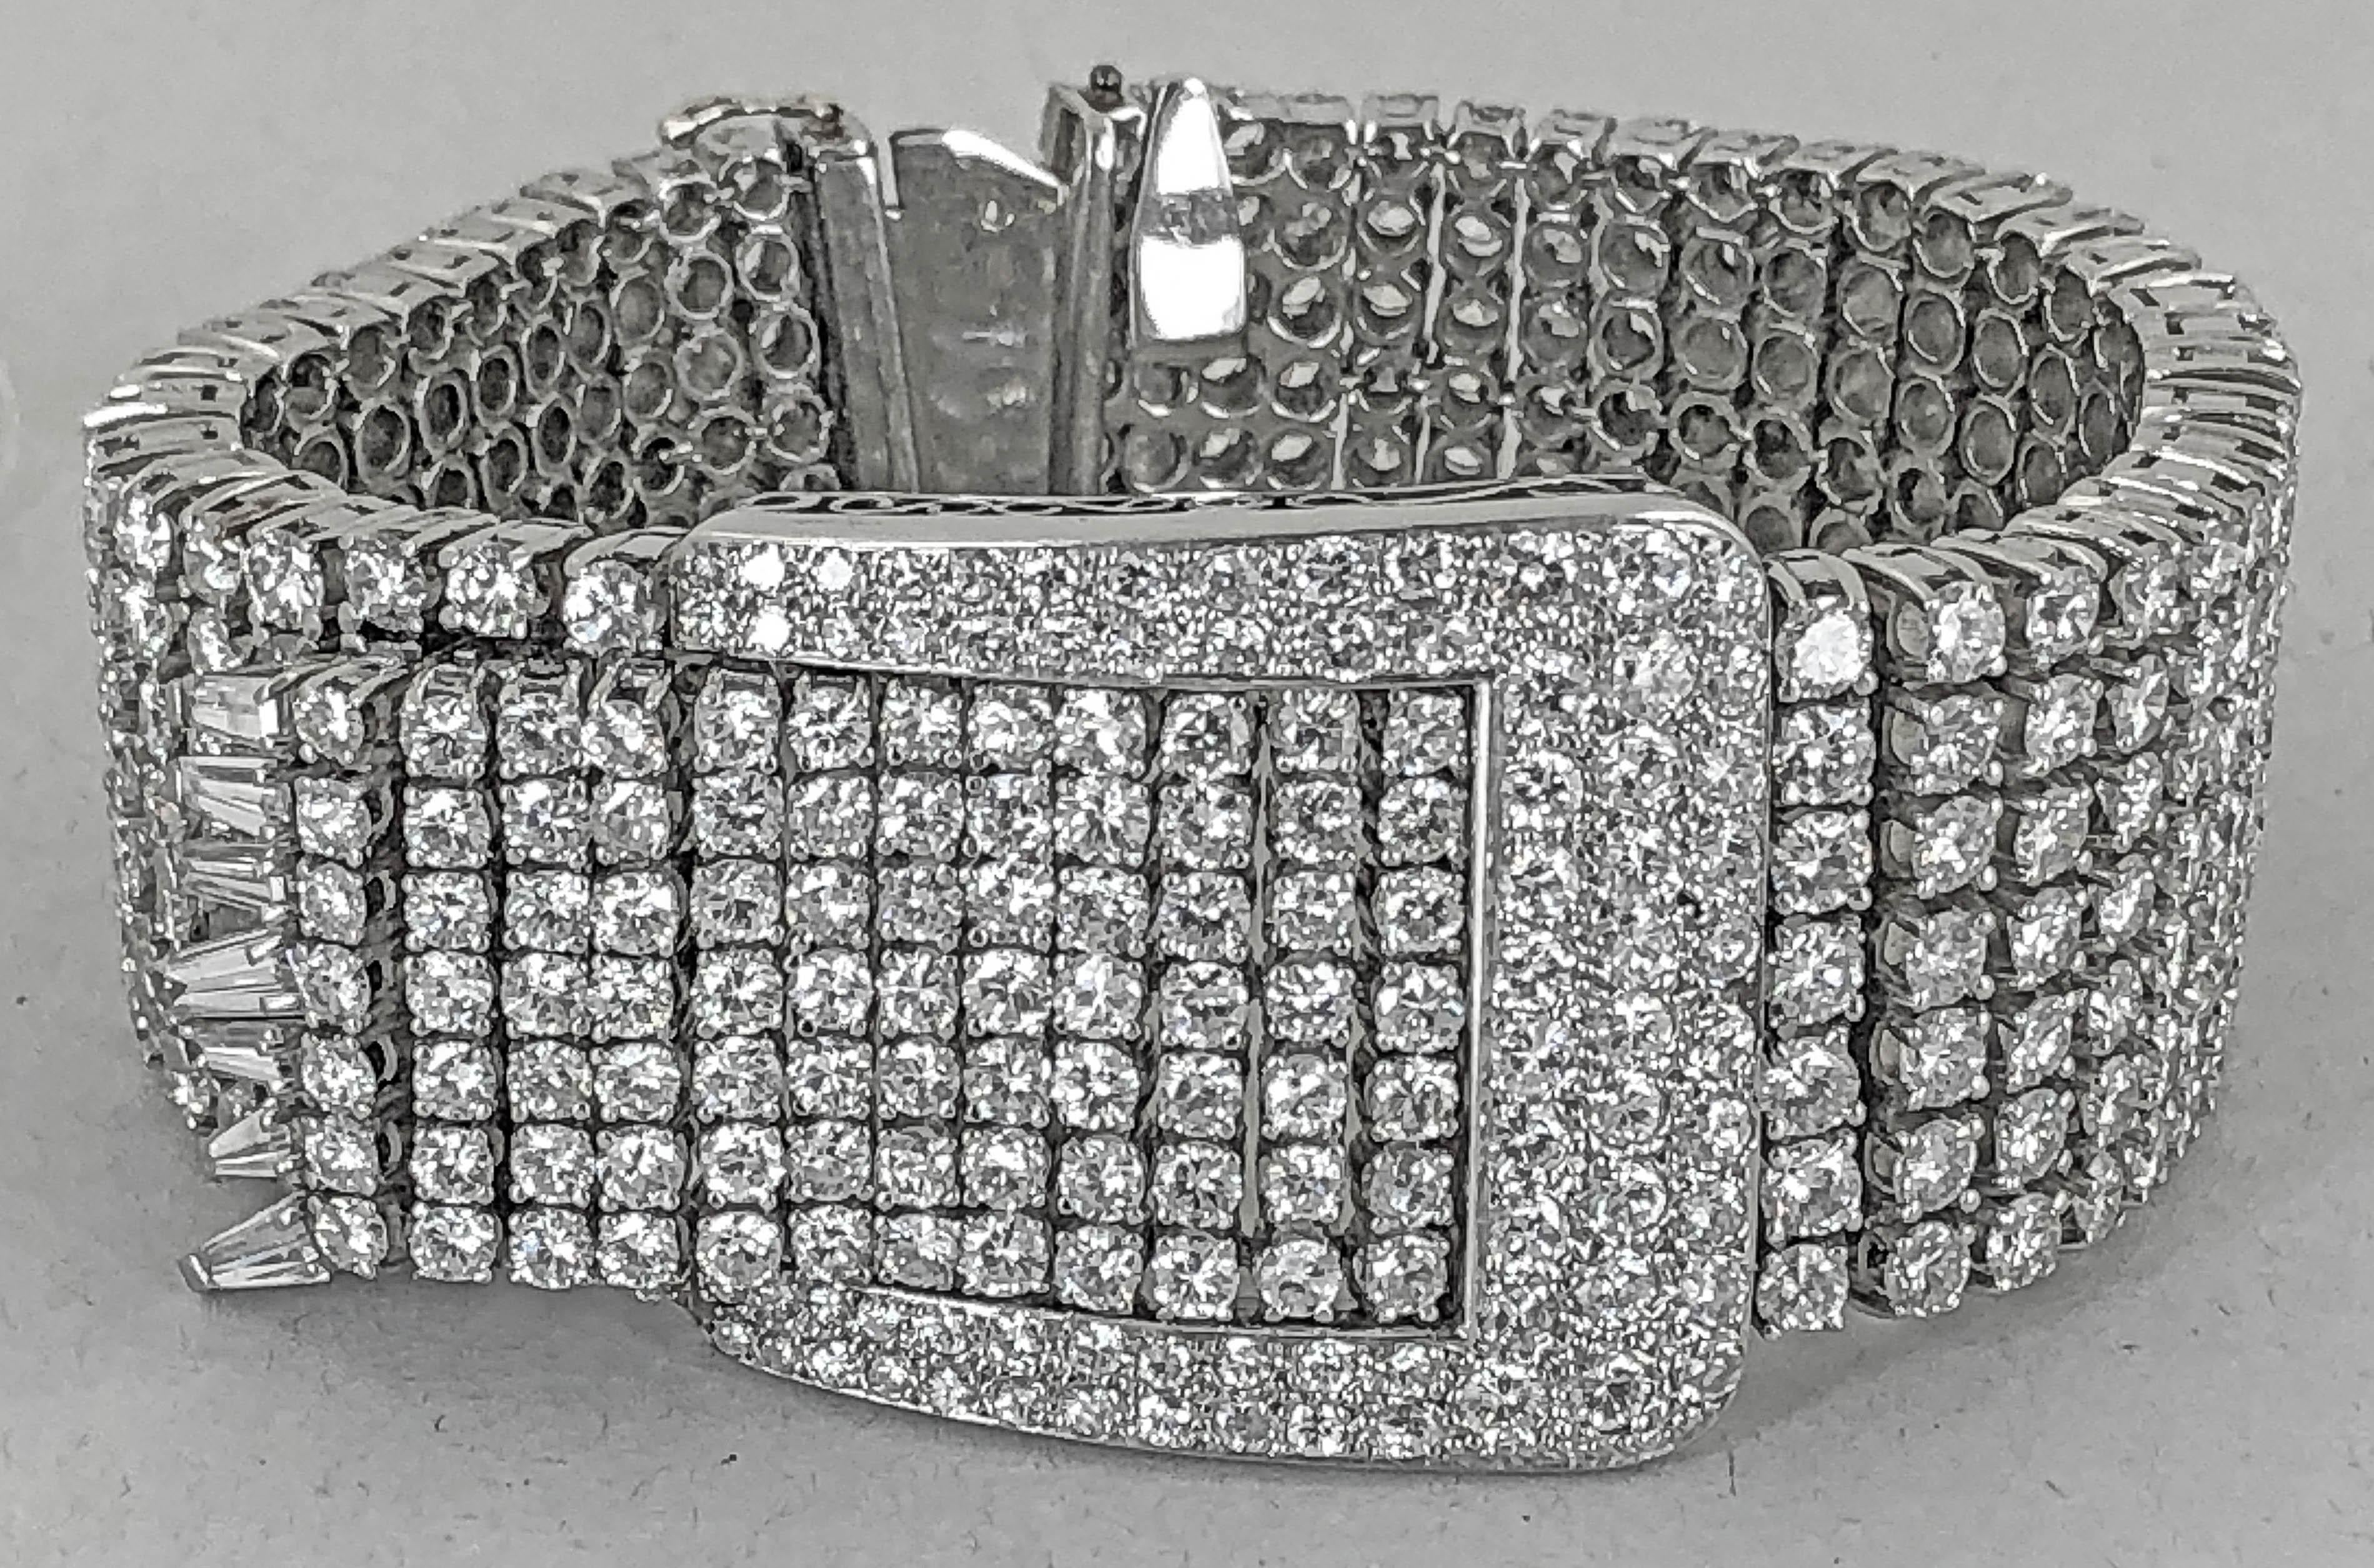 Comprising a platinum bracelet from the 1960s, adorned with the opulence of round-cut diamonds weighing approximately 50 carats placed together to form a buckle motif.  The bracelet measures approximately 7 1/4 inches in length and 1 1/4 inches in